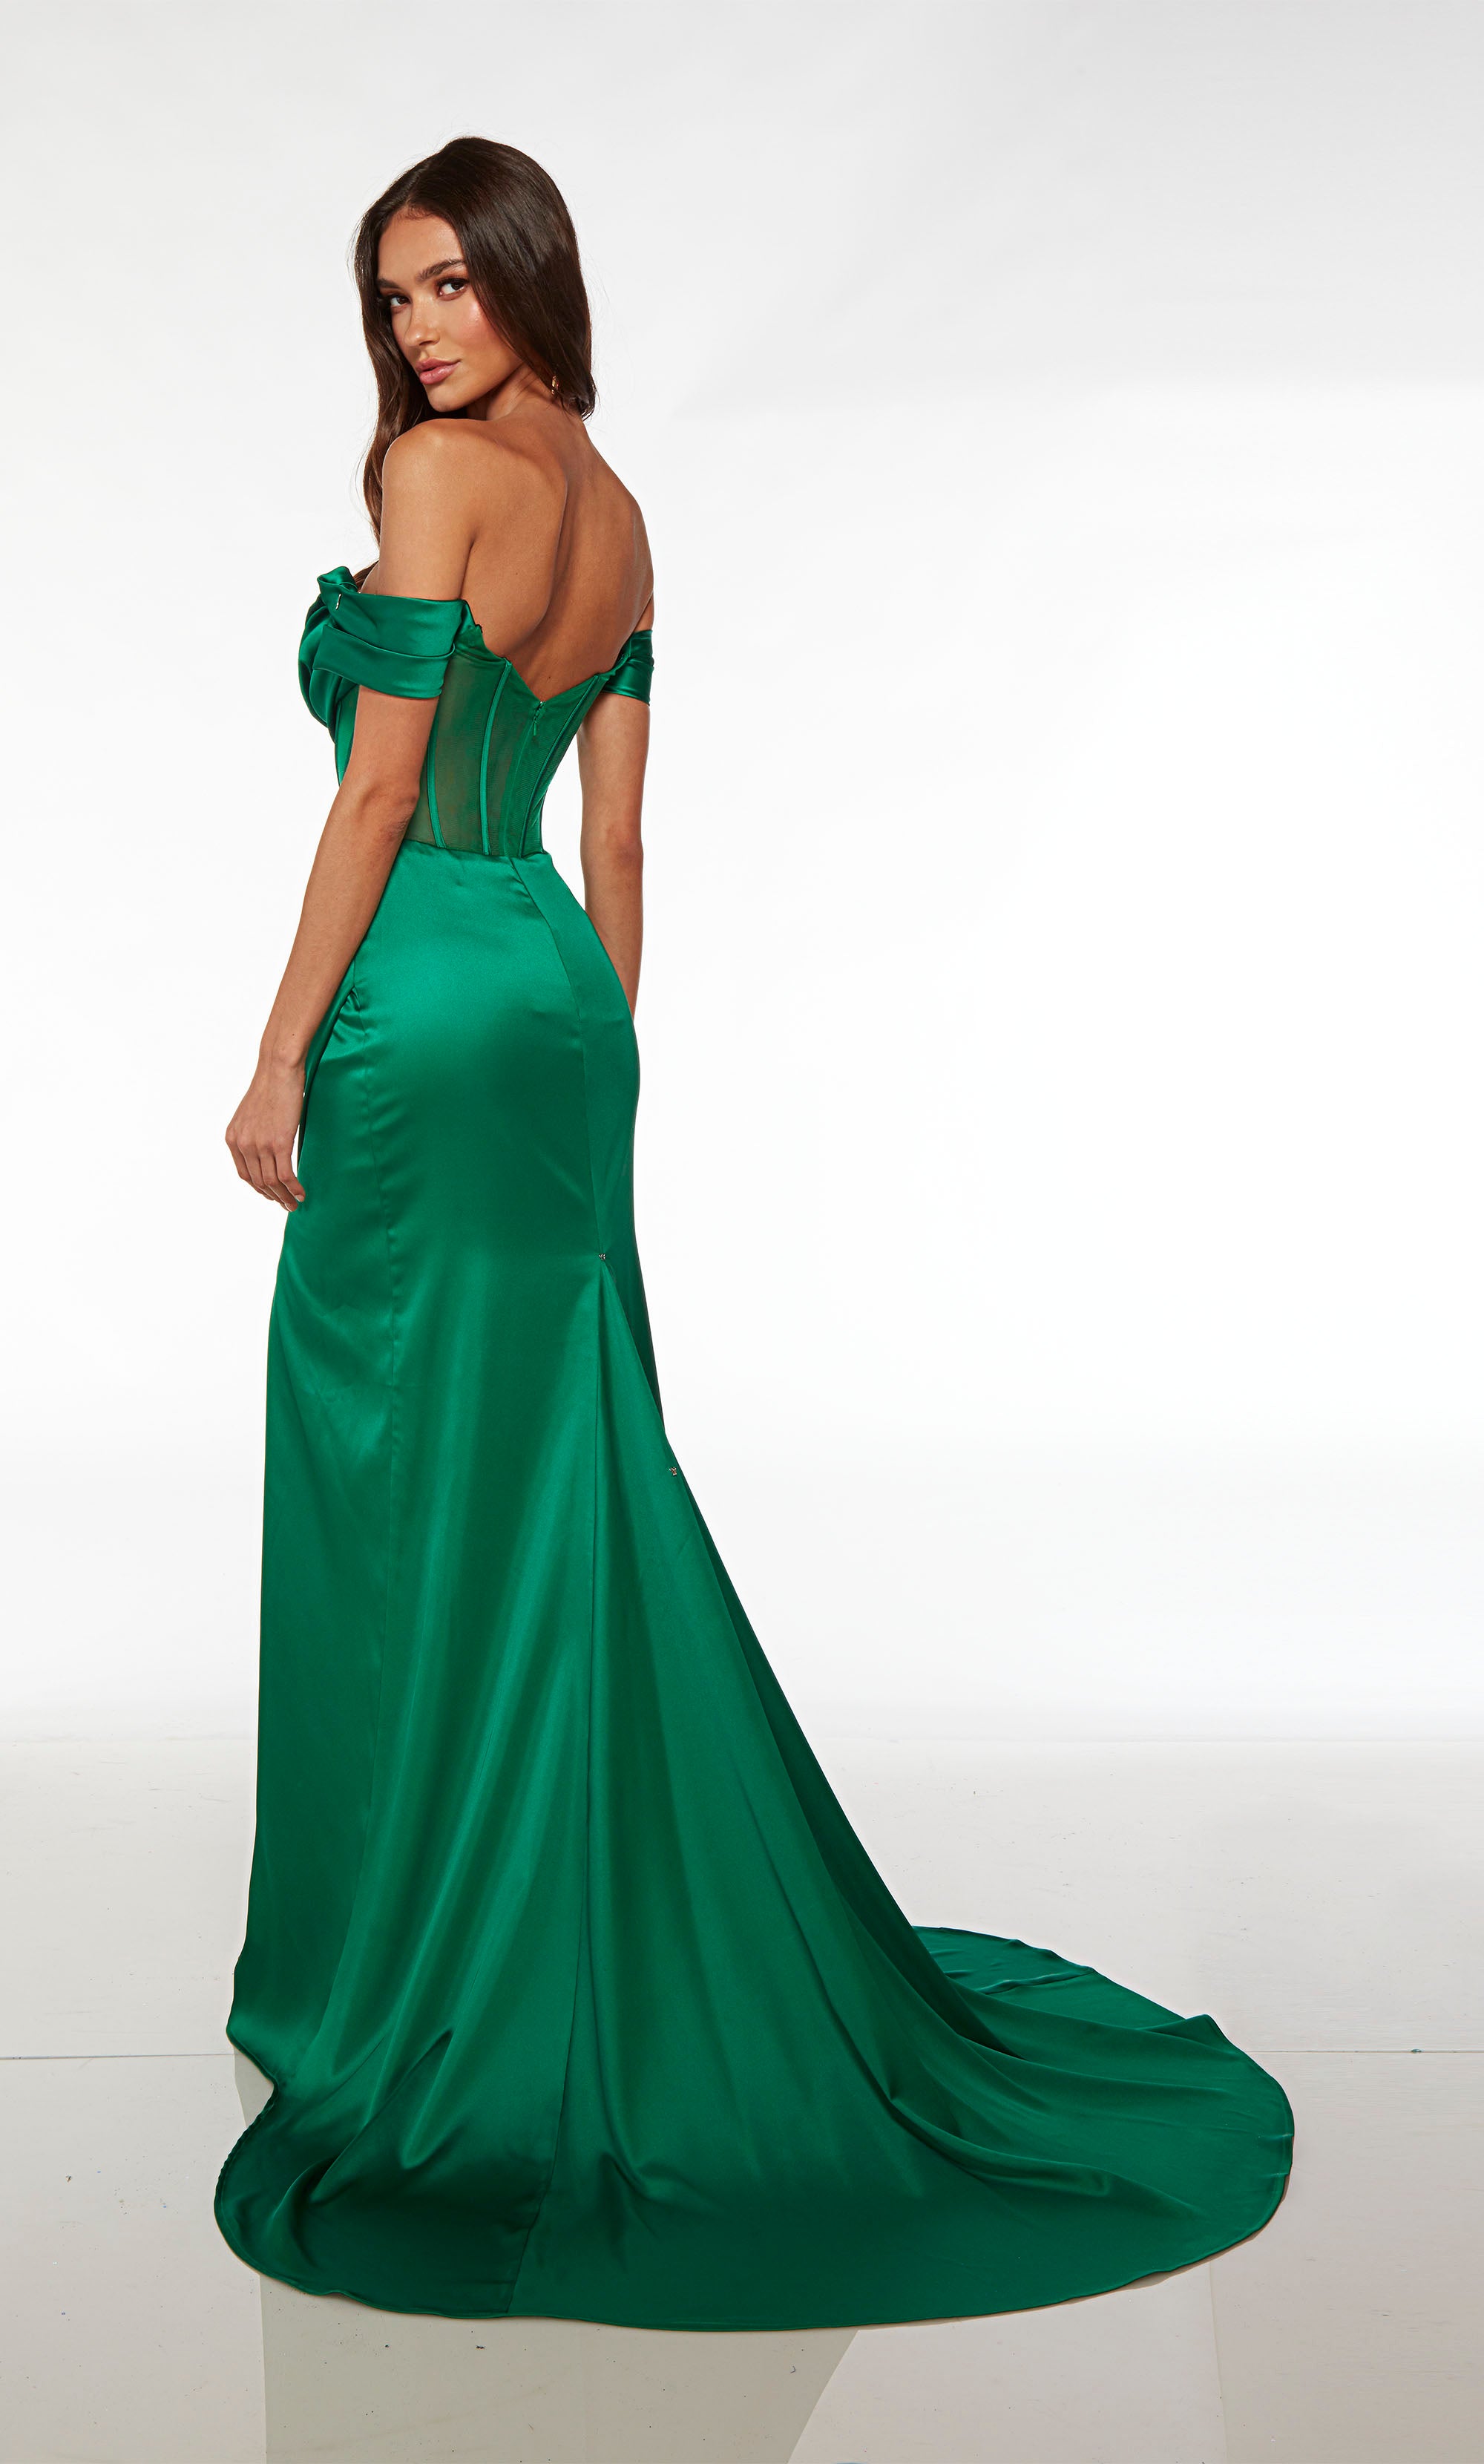 elegant formal green long satin evening dress with sequined sleeves  #MYX79007 - GemGrace.com